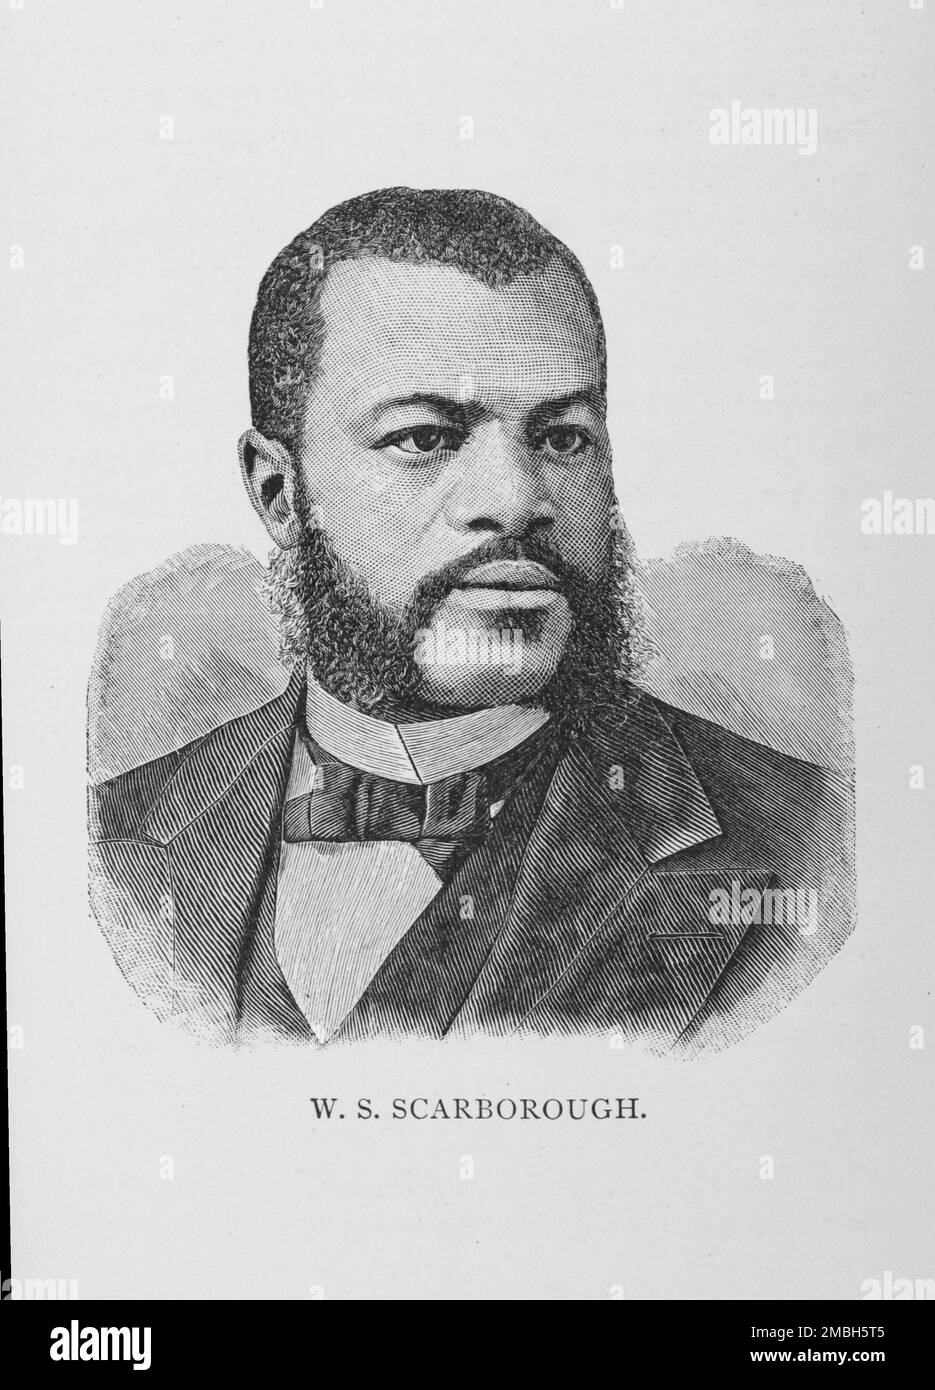 W. S. Scarborough, 1887. African-American classical scholar William Sanders Scarborough was born into slavery. He served as president of Wilberforce University, and wrote a widely-used university textbook on Classical Greek. From &quot;Men of Mark: Eminent, Progressive and Rising&quot; by William J. Simmons. Stock Photo